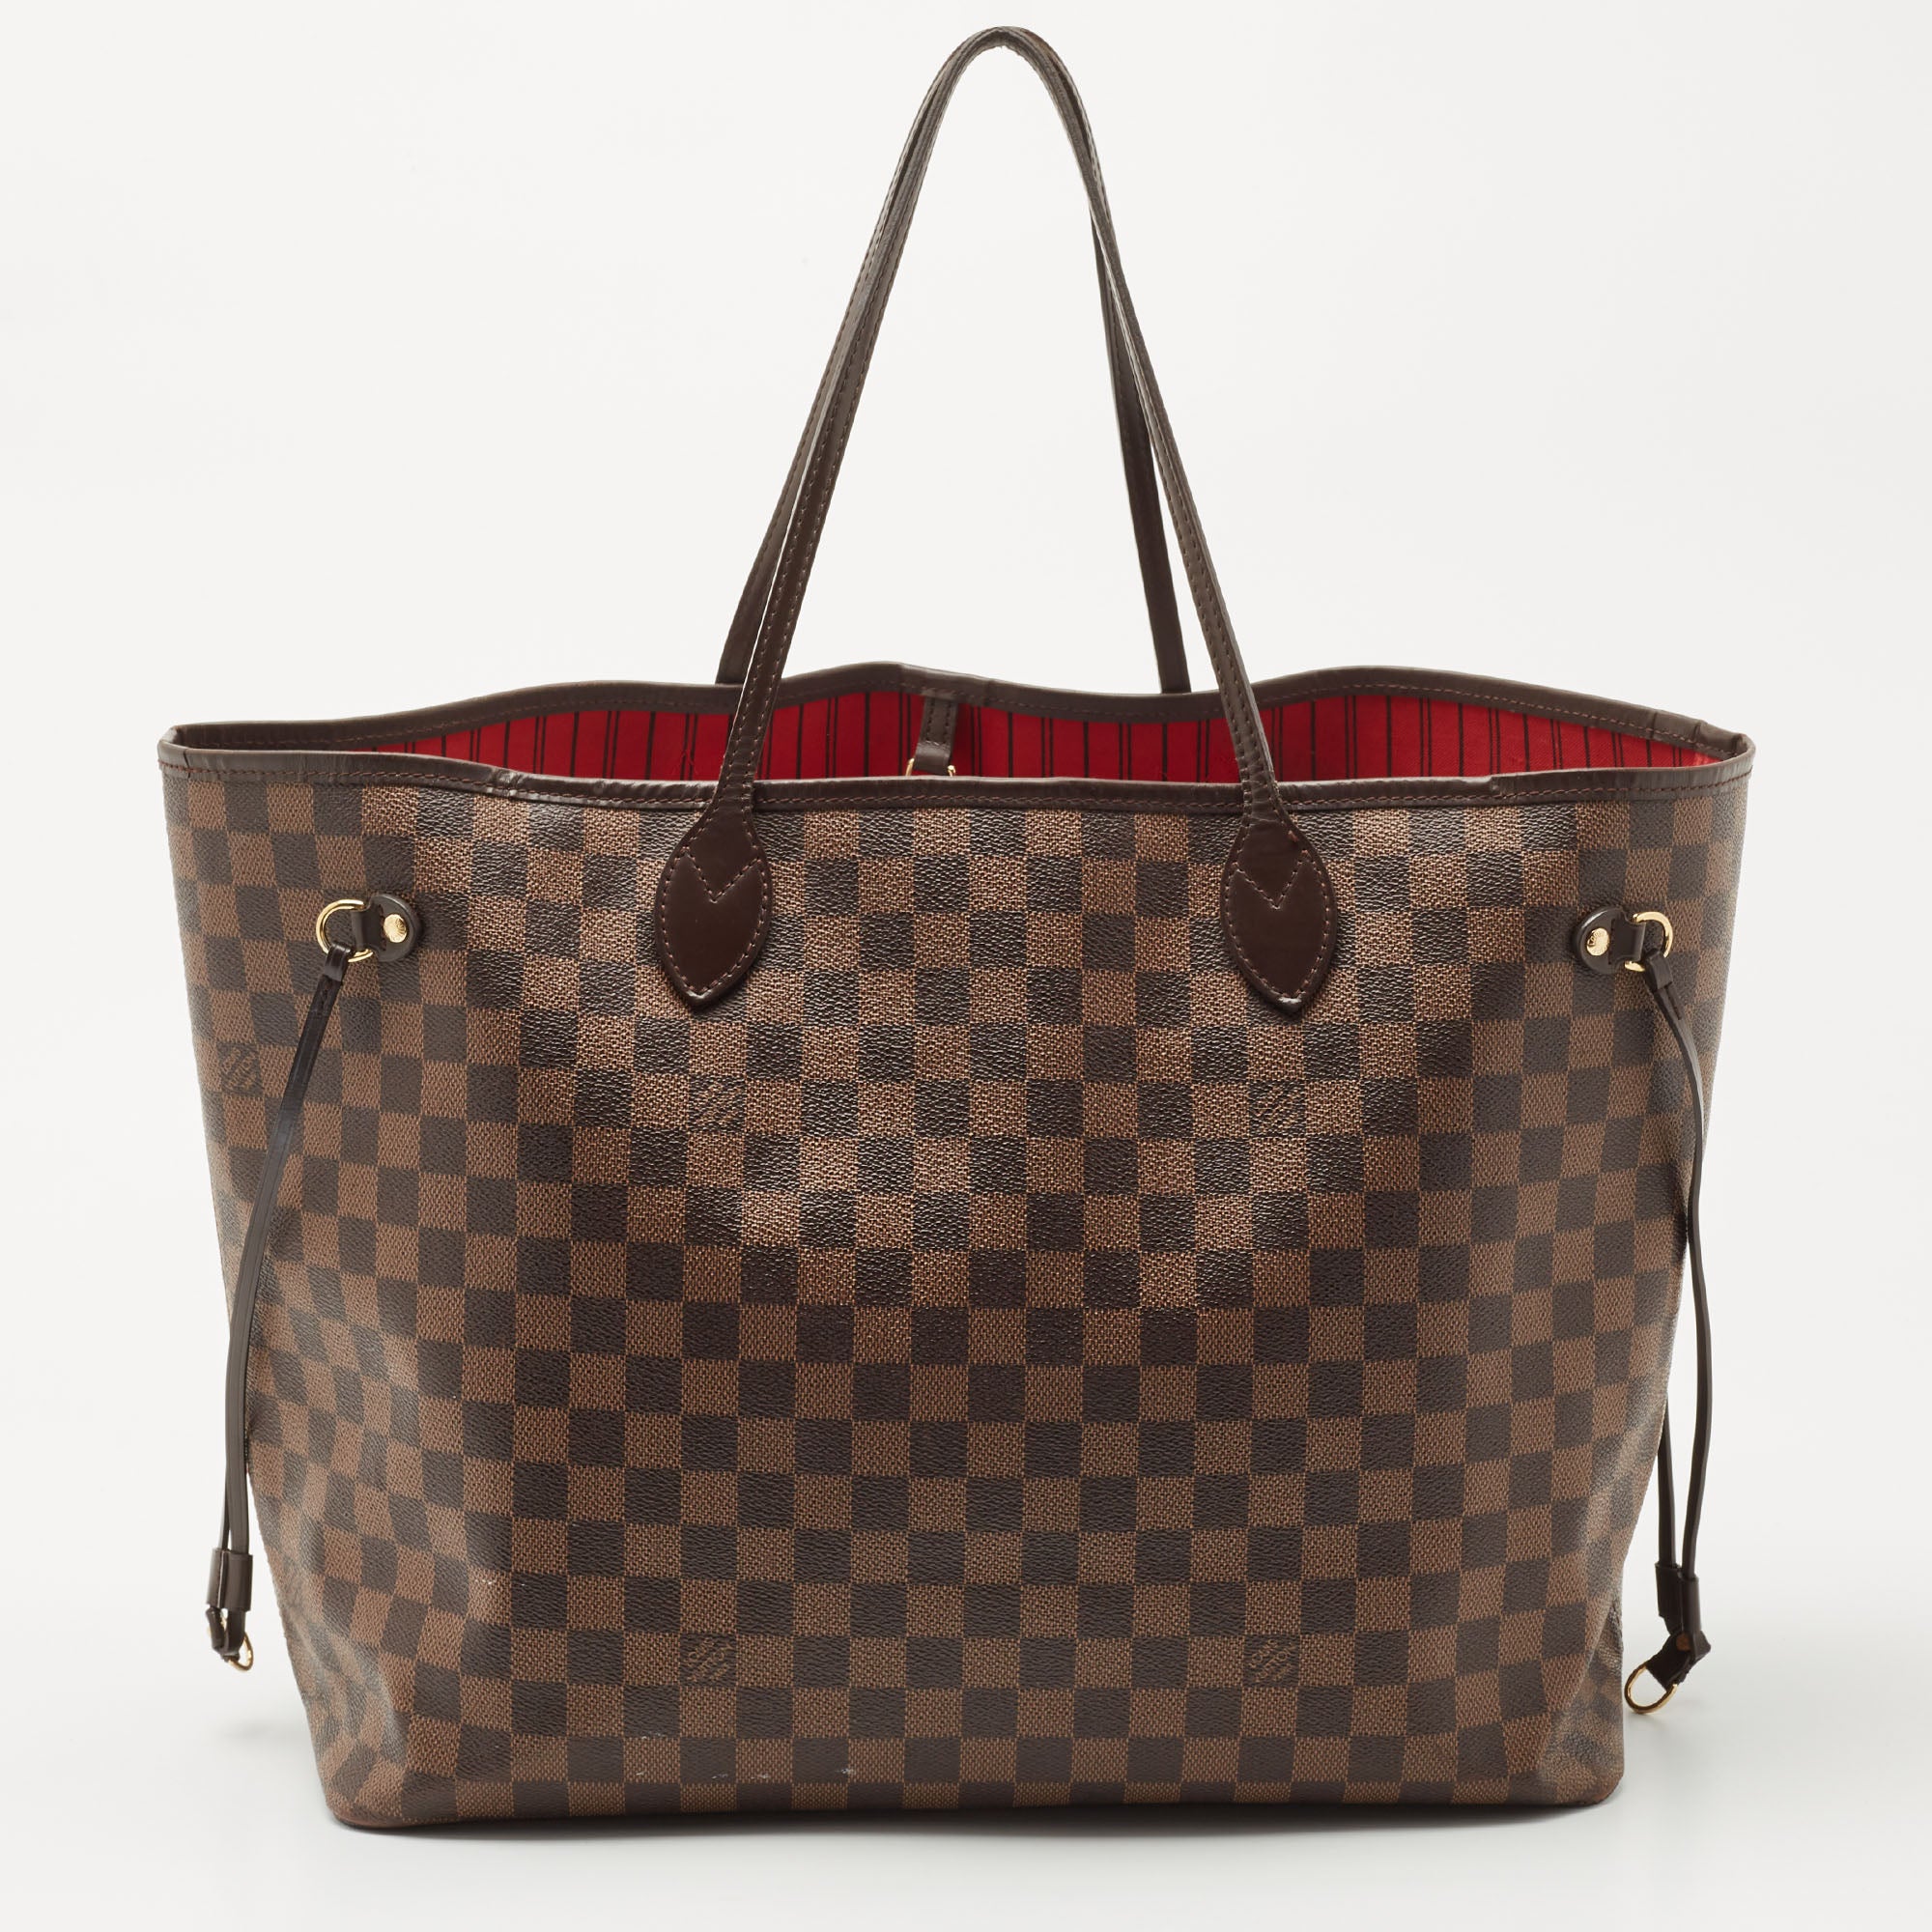 Auth Louis Vuitton Damier Ebene Male Tote Bag Hand Bag N42240 Used